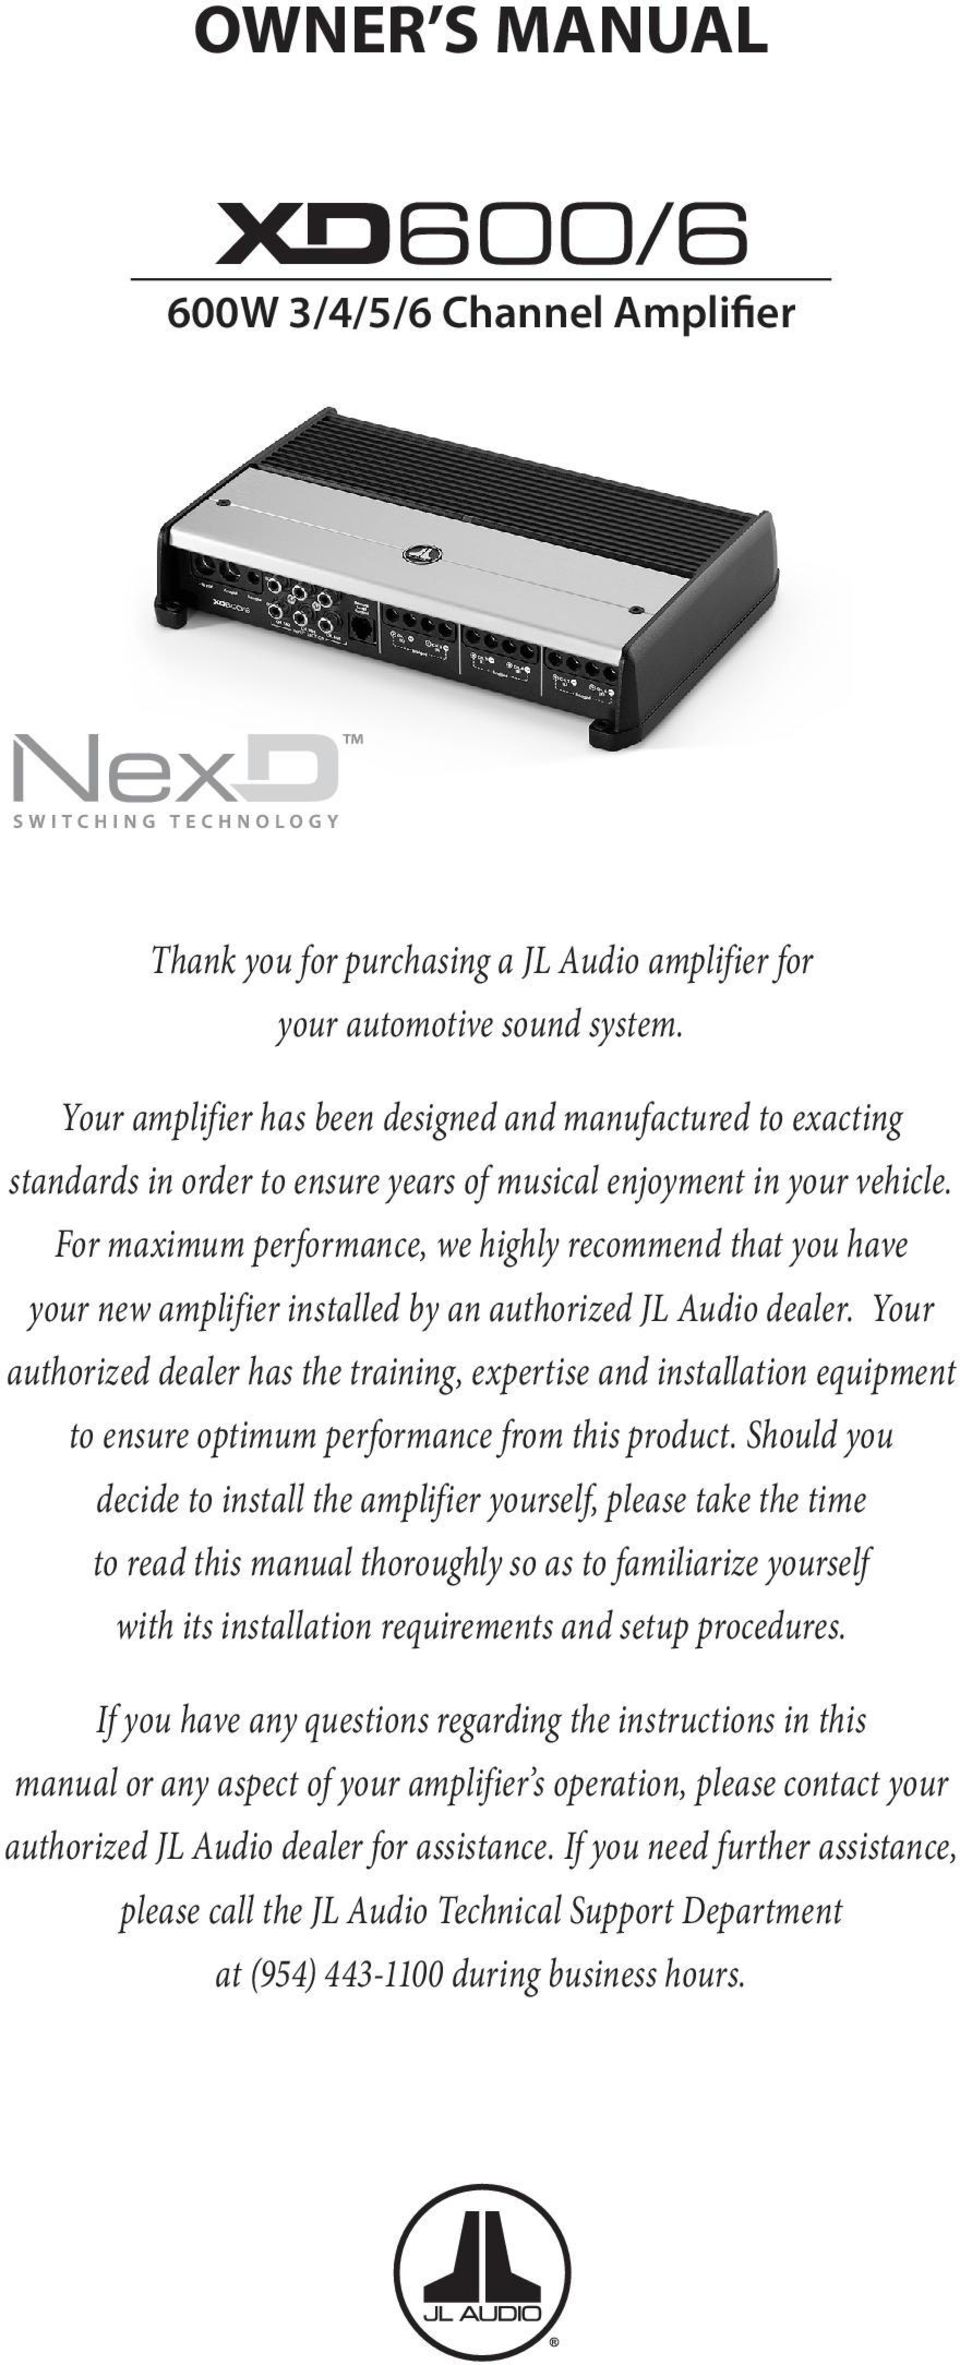 For maximum performance, we highly recommend that you have your new amplifier installed by an authorized JL Audio dealer.